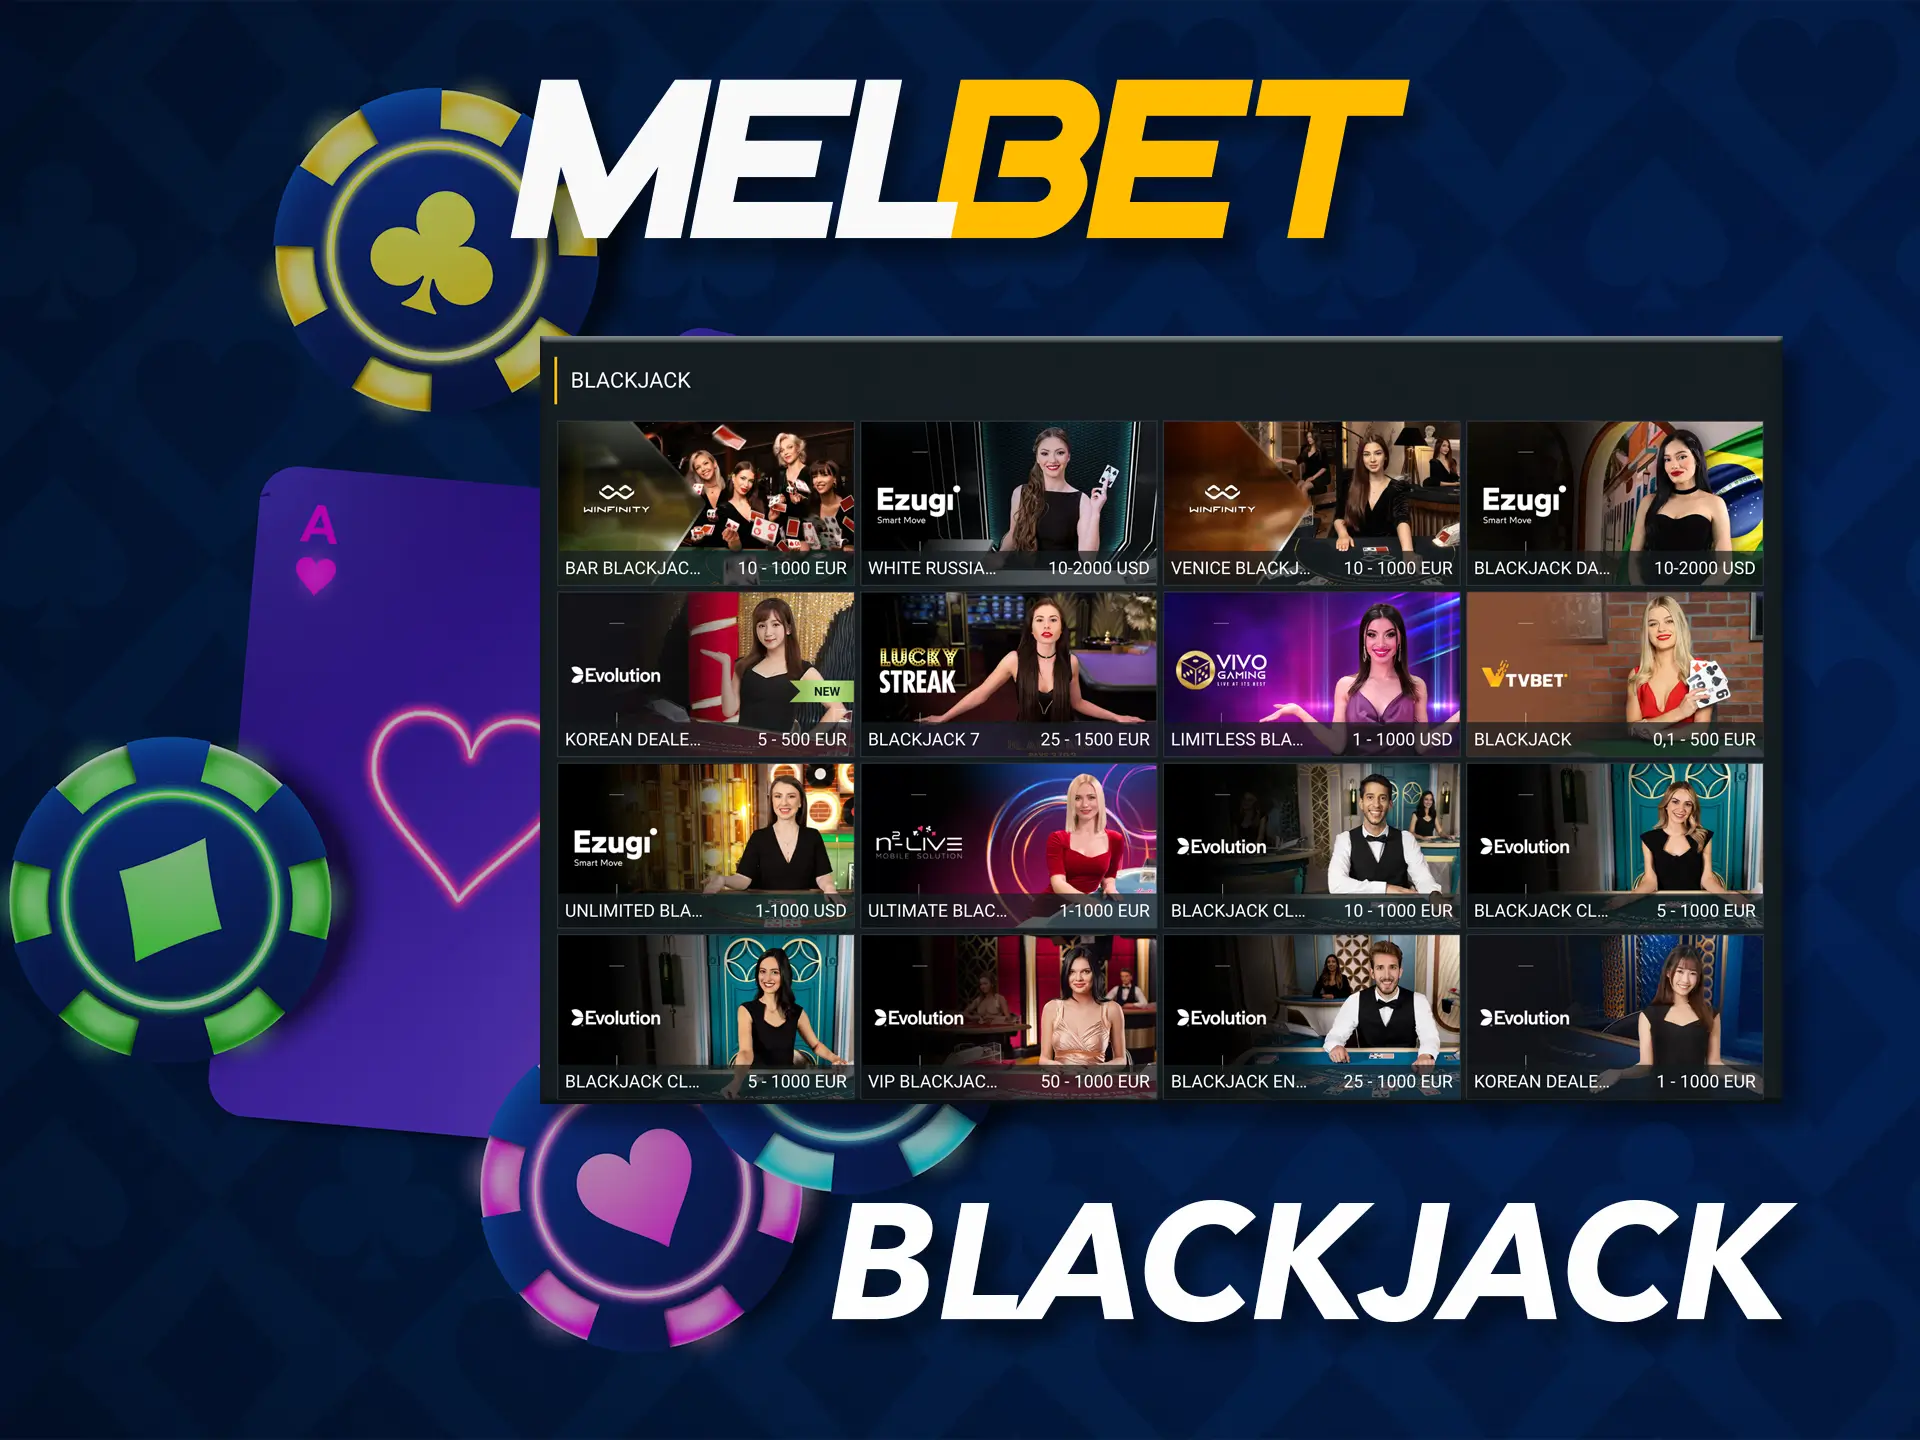 Try your luck and win at blackjack from Melbet.